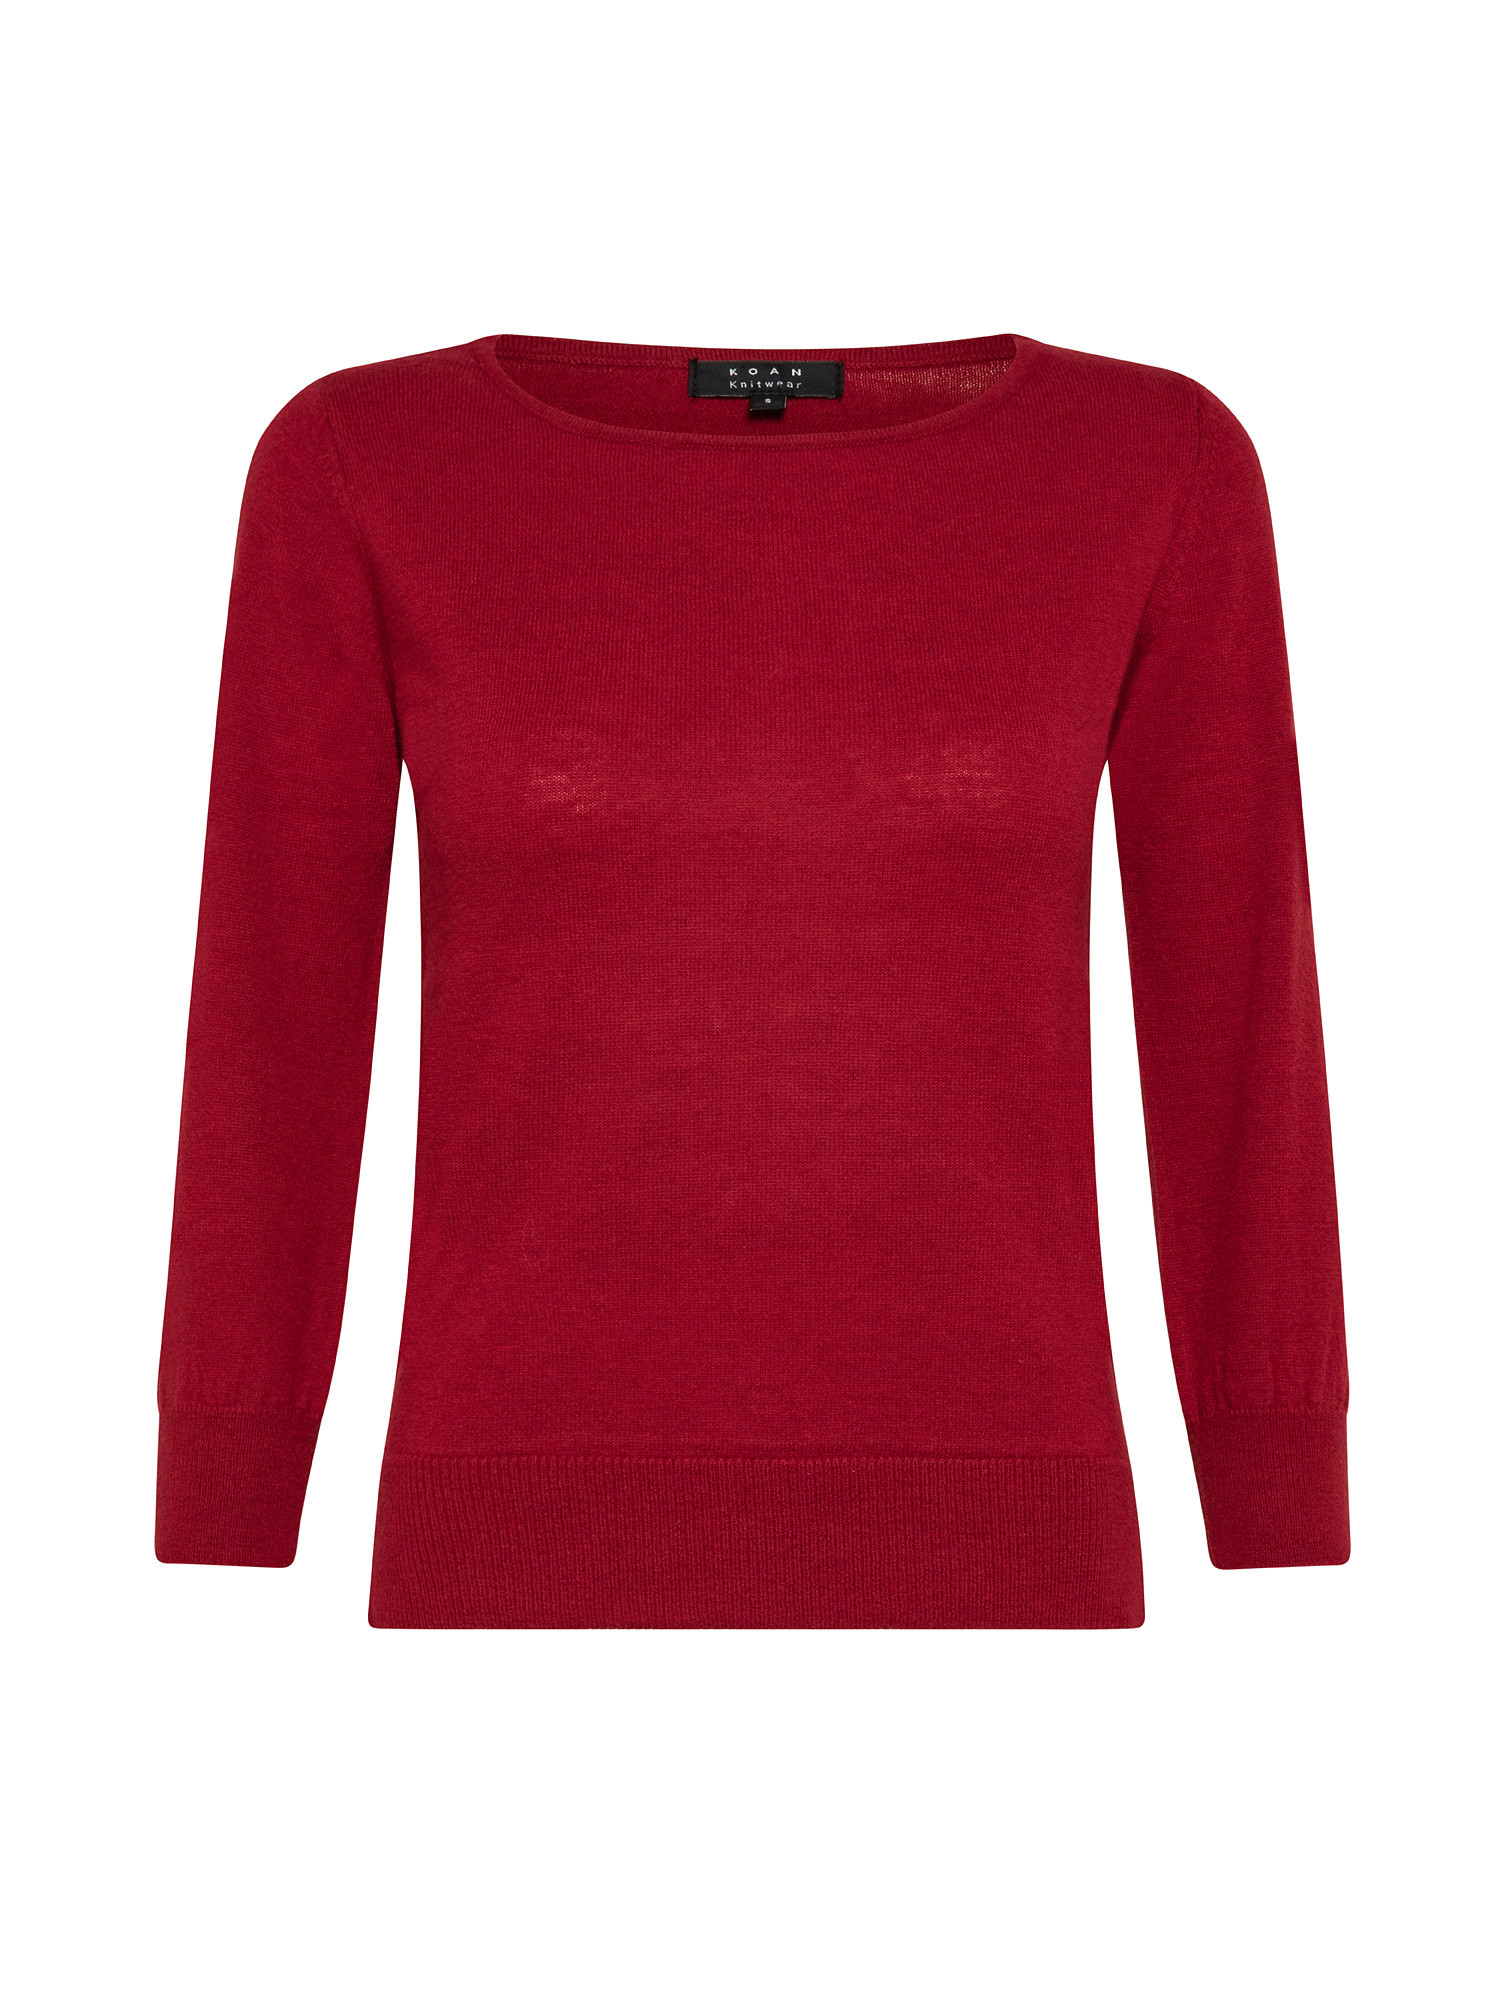 Crewneck sweater, Red, large image number 0